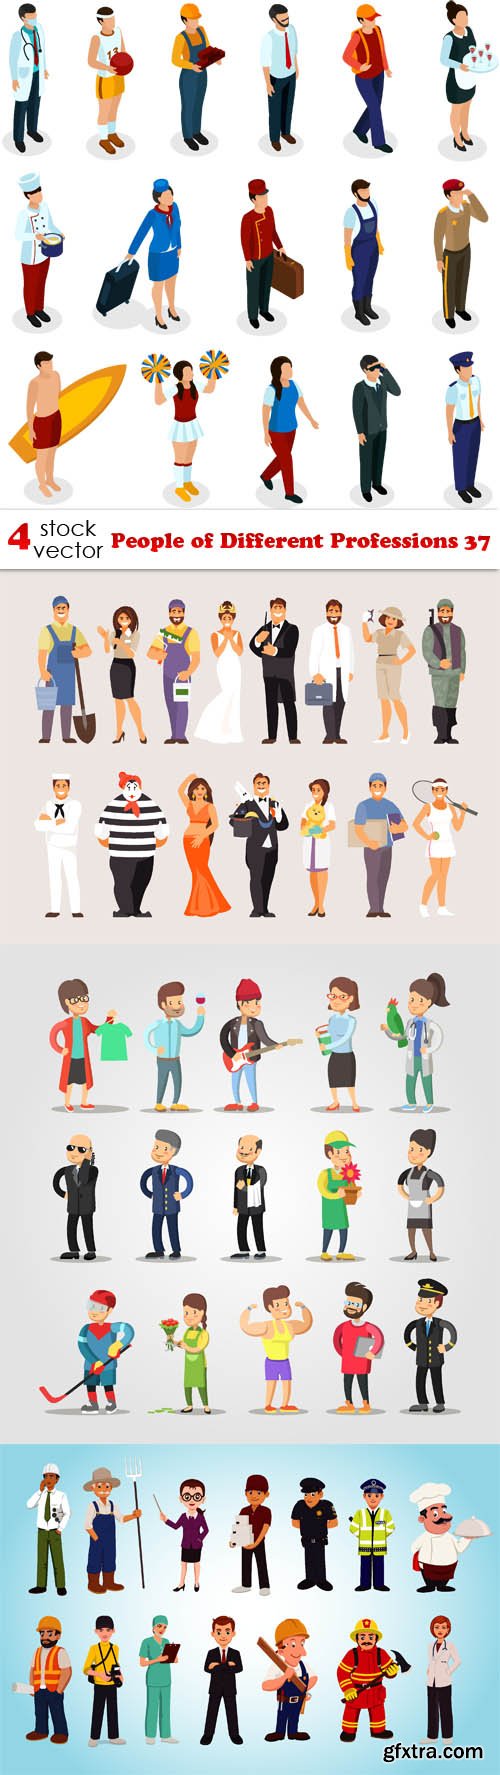 Vectors - People of Different Professions 37